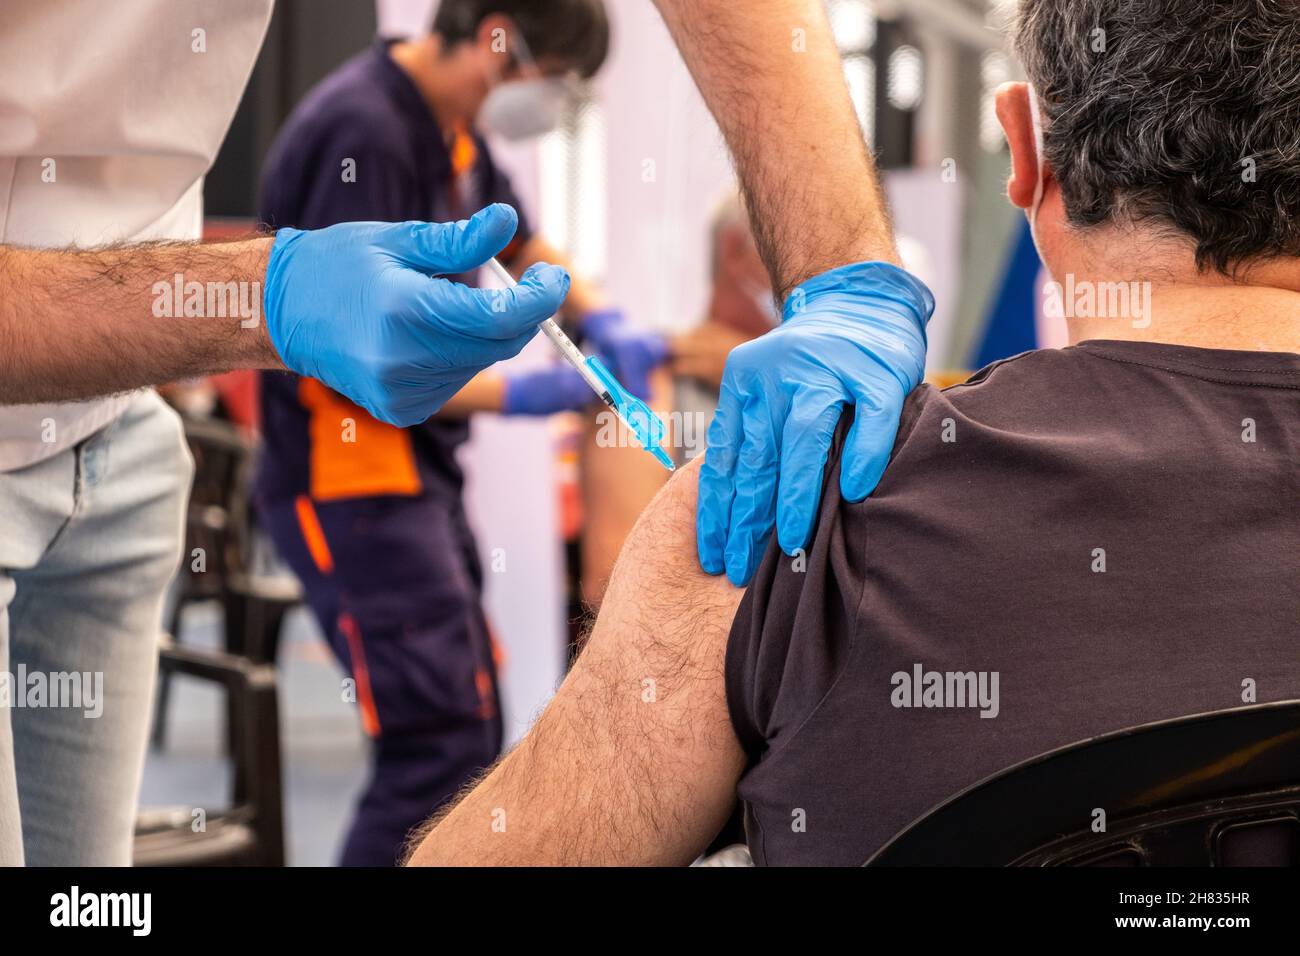 Valencia, Spain; 6th april 2021: Healthcare professional injects the anticovid vaccine to a patient at a Vaccination Center. Anti-covid vaccination ca Stock Photo